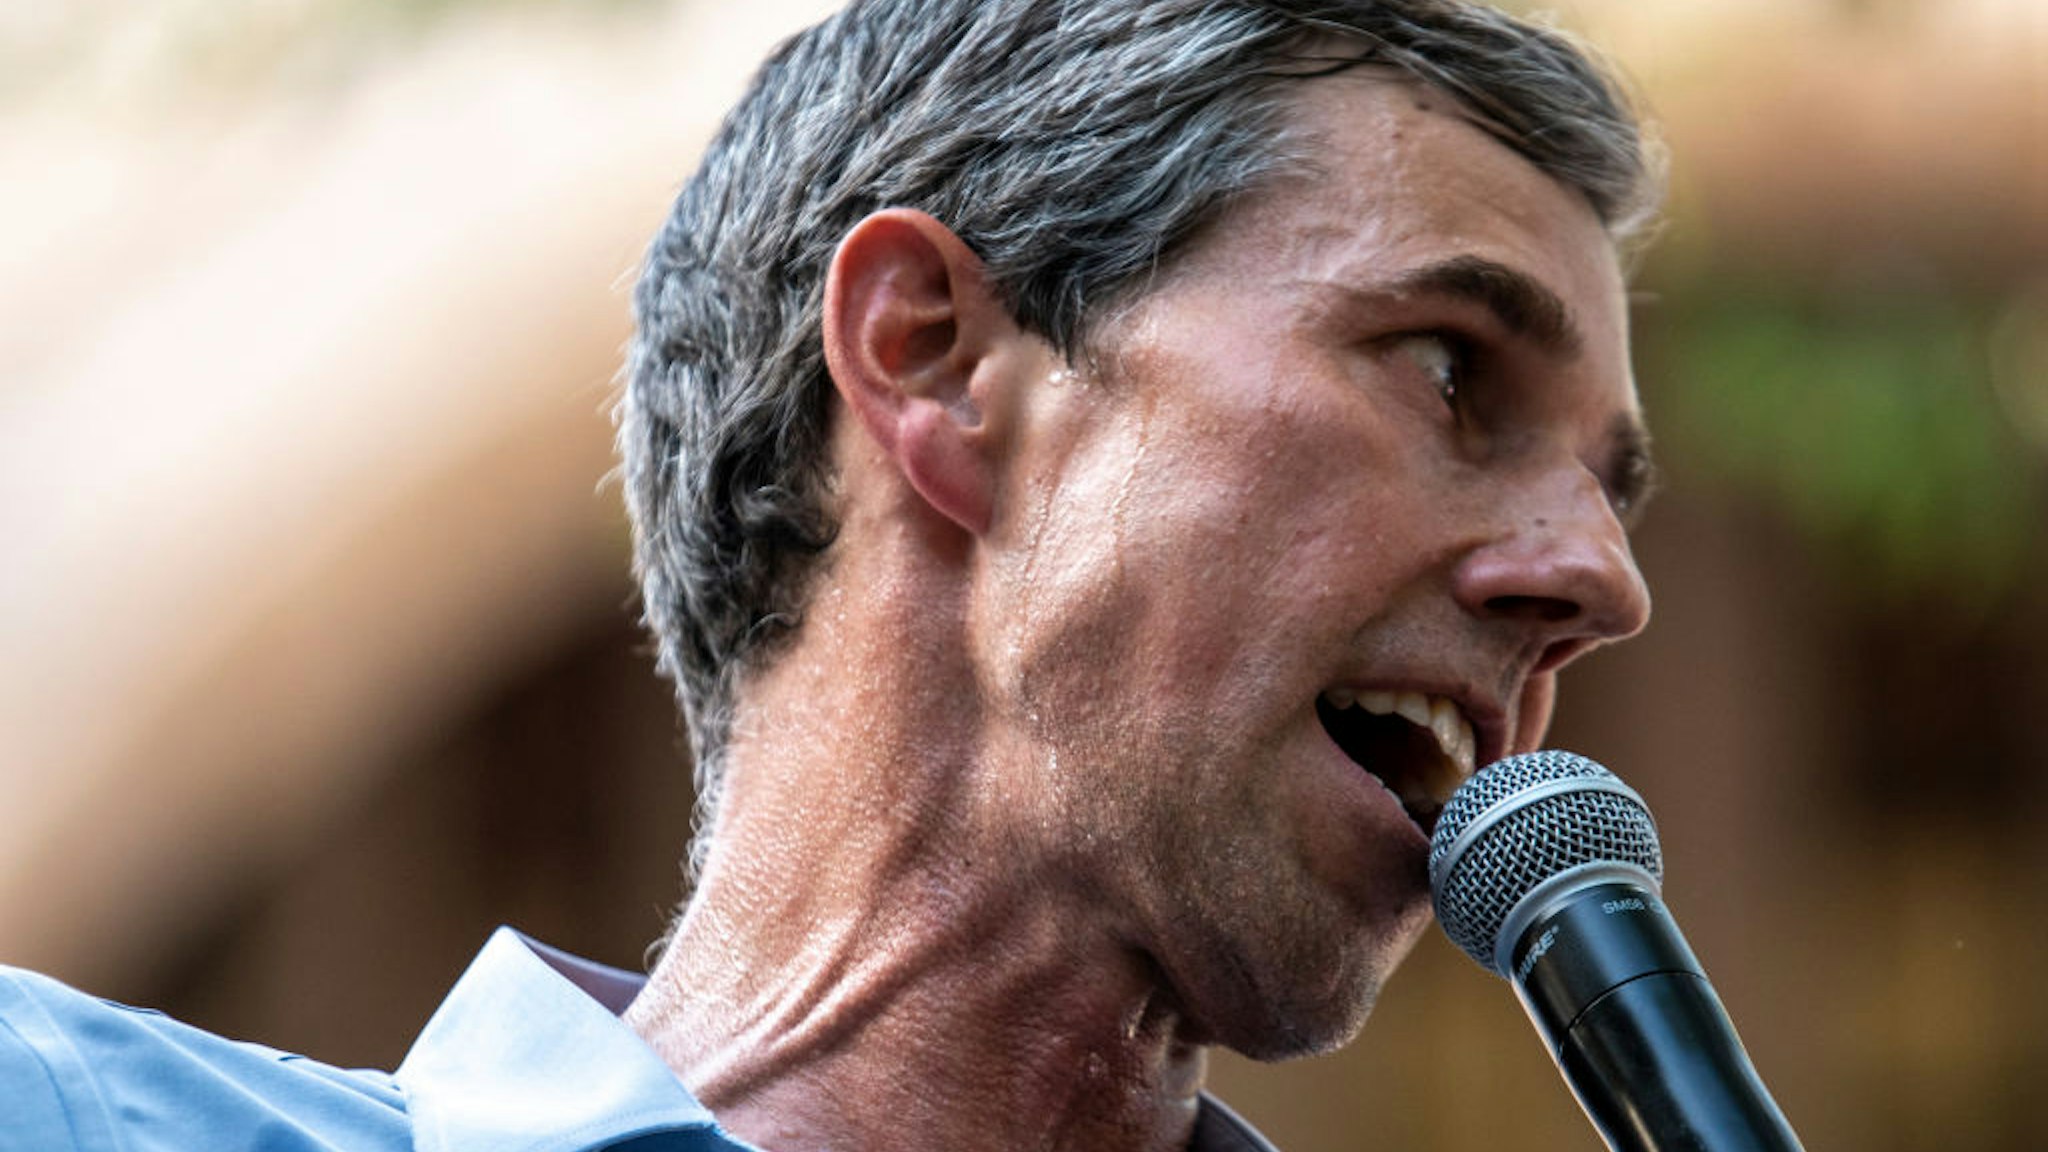 AUSTIN, TX - JUNE 20: Former U.S. Rep. Beto O'Rourke (D-TX) speaks at a rally at the state Capitol on June 20, 2021 in Austin, Texas. The rally is one of many O'Rourke is holding across Texas to fight SB7, a controversial voting bill that was derailed after house Democrats walked out of the session. The bill set limits on early voting hours, banned drive-through voting, made it a felony for officials to send unsolicited absentee ballot requests and lowered the standard for overturning an election based on fraud. Gov. Greg Abbott has vowed to call a special session on the measure.